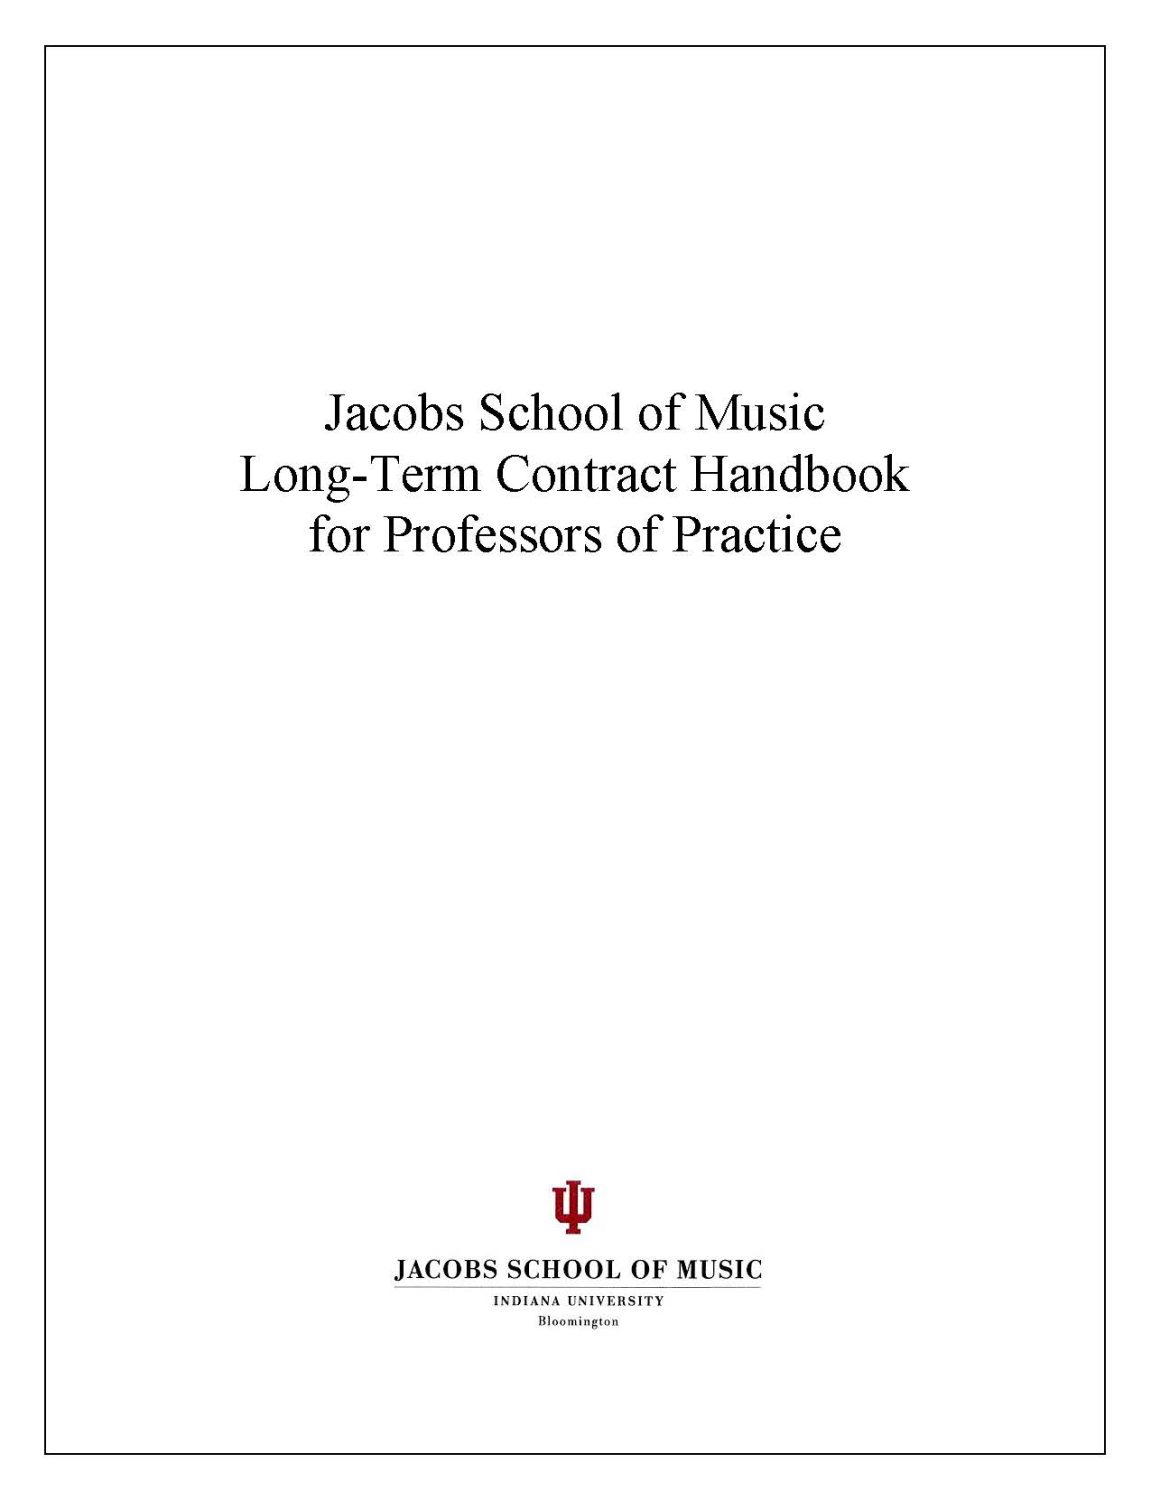 Cover image for Jacobs School of Music Long-Term Contract Handbook for Professors of Practice